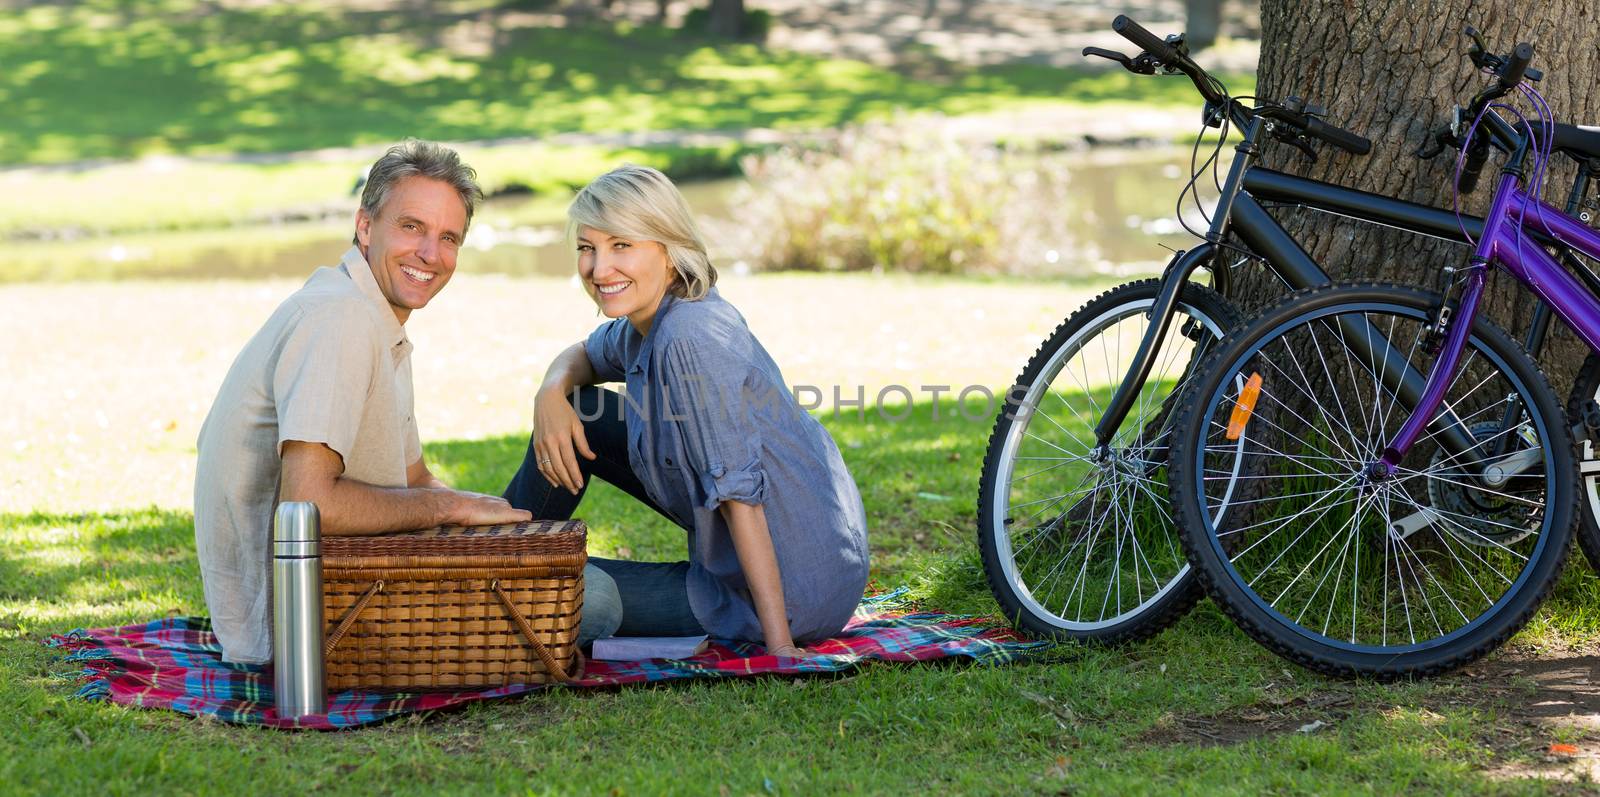 Couple with picnic basket in park by Wavebreakmedia